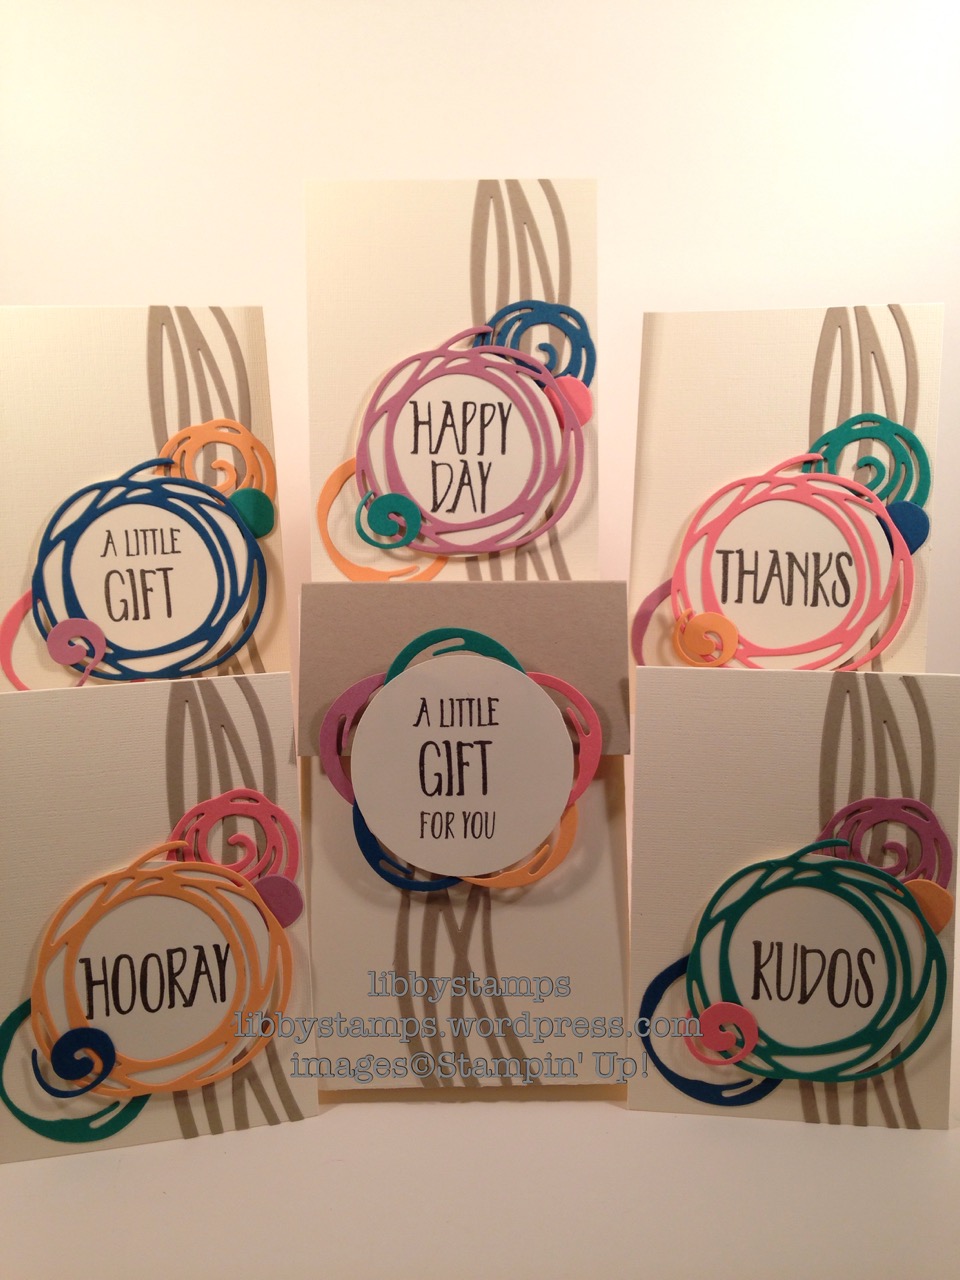 libbystamps, stampin up, Perfectly Wrapped, Swirly Scribbles Thinlits, BFBH, Blogging Friends Blog Hop, 2016-2018 In-Color